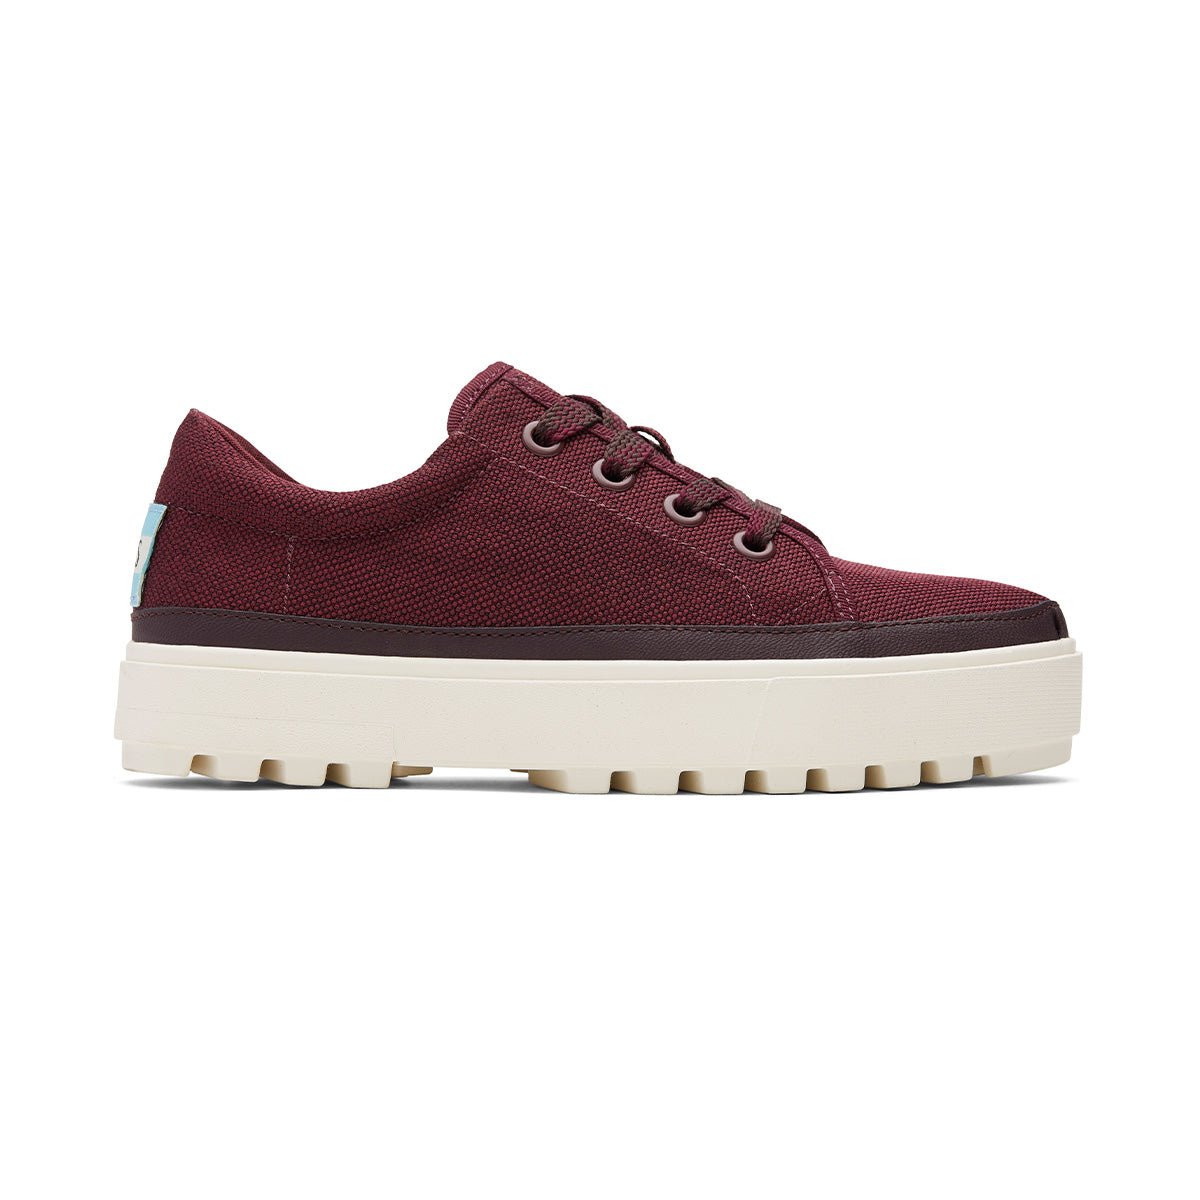 TOMS Sneakers Lace up Lug Women - Burgundy Heavy Canvas